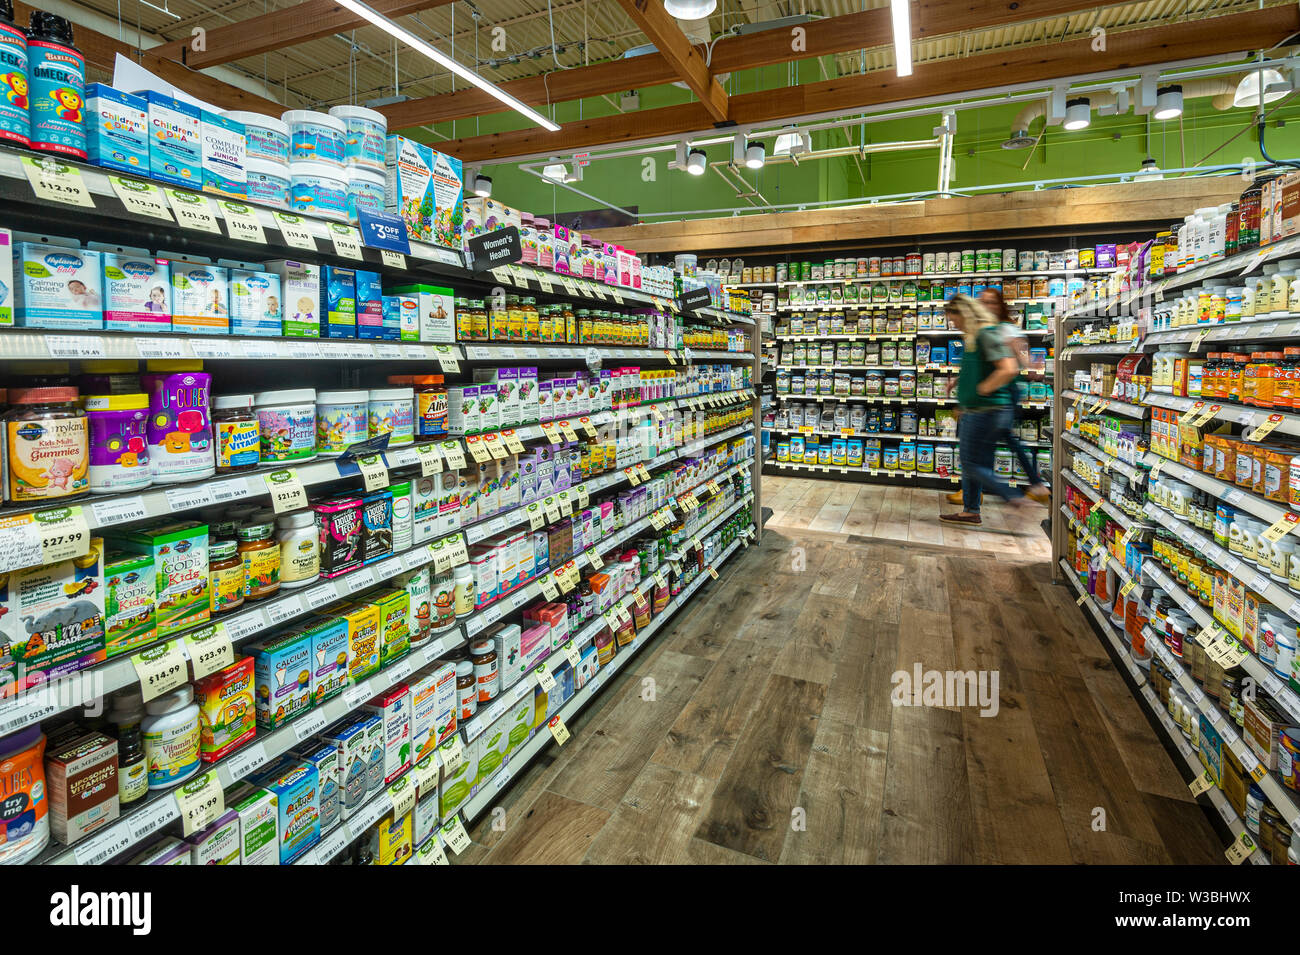 Vitamin & Nutritional Supplements Aisle In Grocery Store, USA Stock Photo